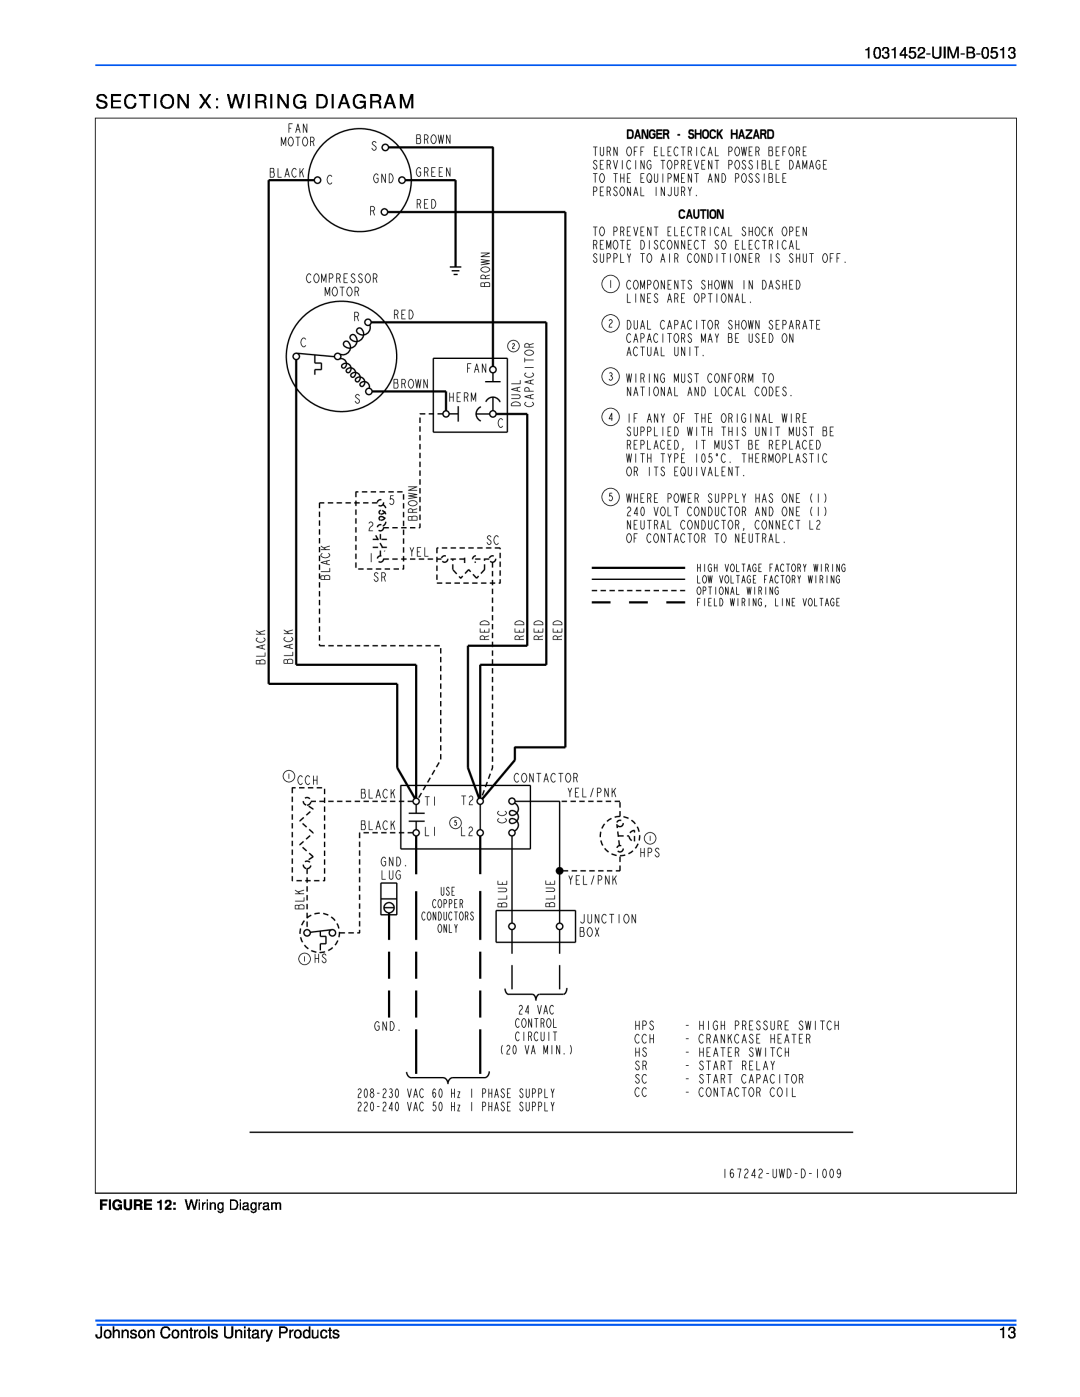 Johnson Controls 13 SEER - GCGD installation manual Section X Wiring Diagram, UIM-B-0513, Johnson Controls Unitary Products 